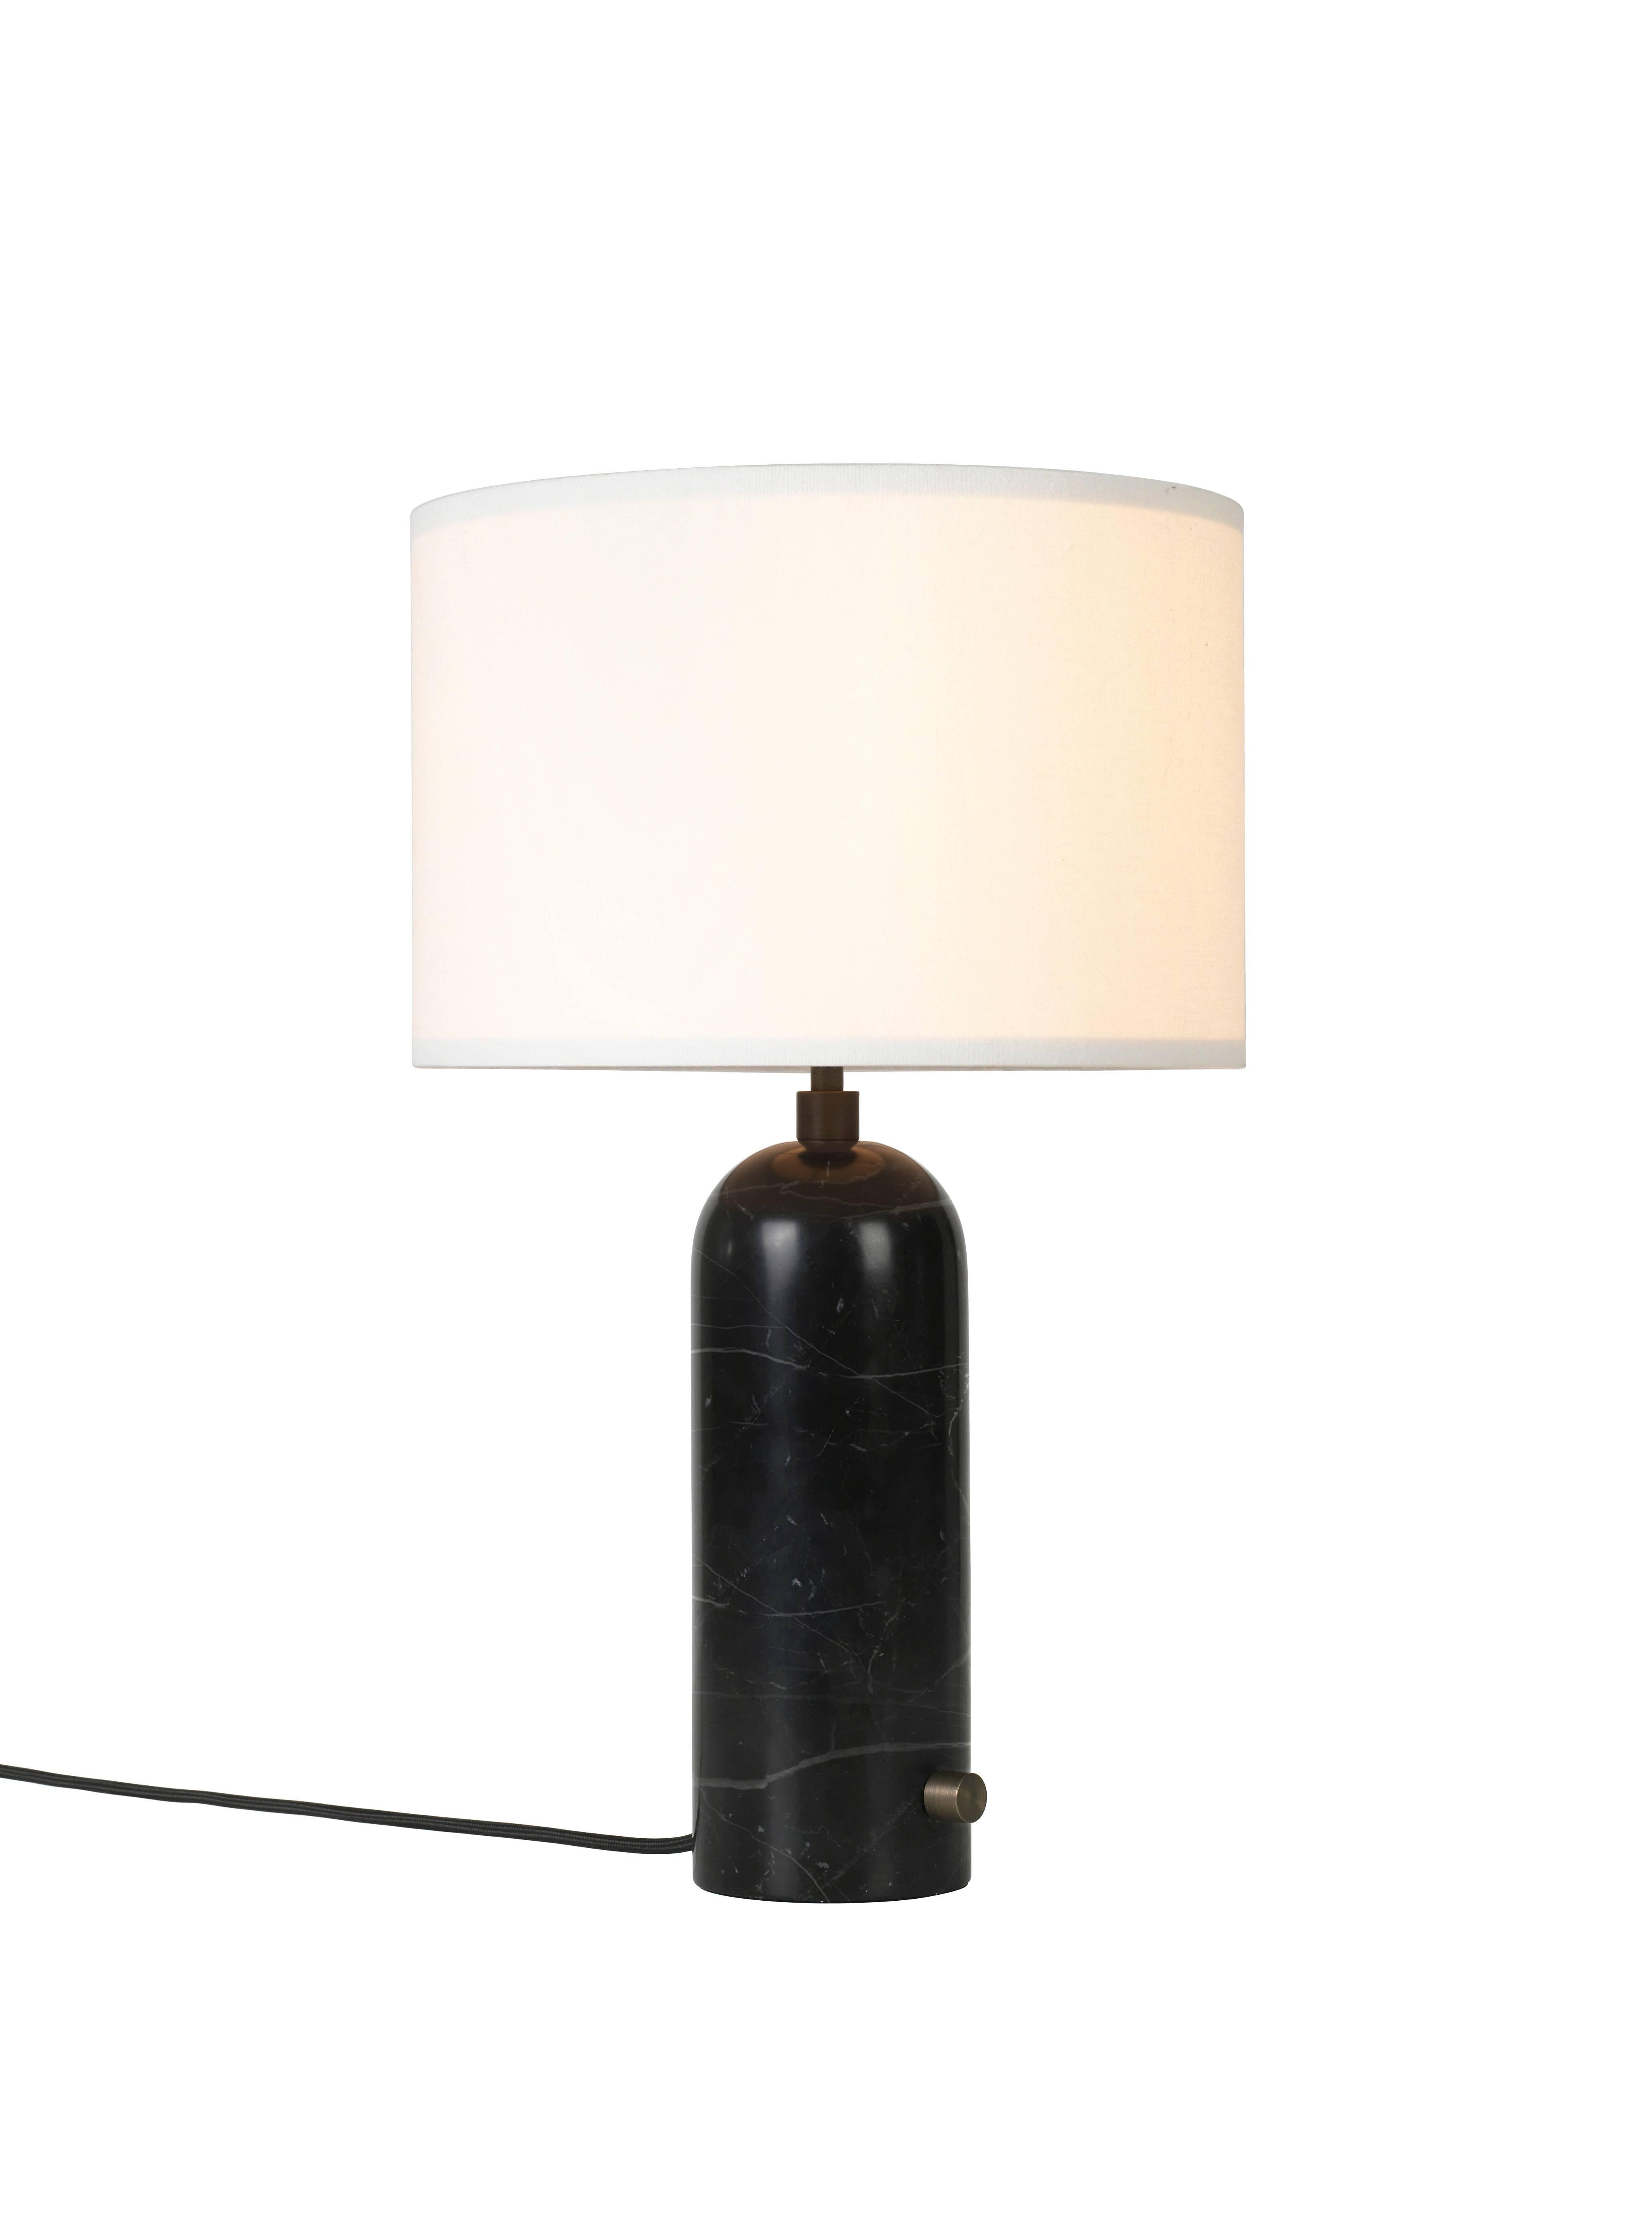 'Gravity' black marble table lamp 
Dimensions: 65 x 41 x 41 cm
Material: Marble
Designer: Louis Weisdorf
Produced by Gubi in Denmark

The new Gravity Collection designed by Space
Copenhagen, consisting of a table lamp and a floor
lamp, is